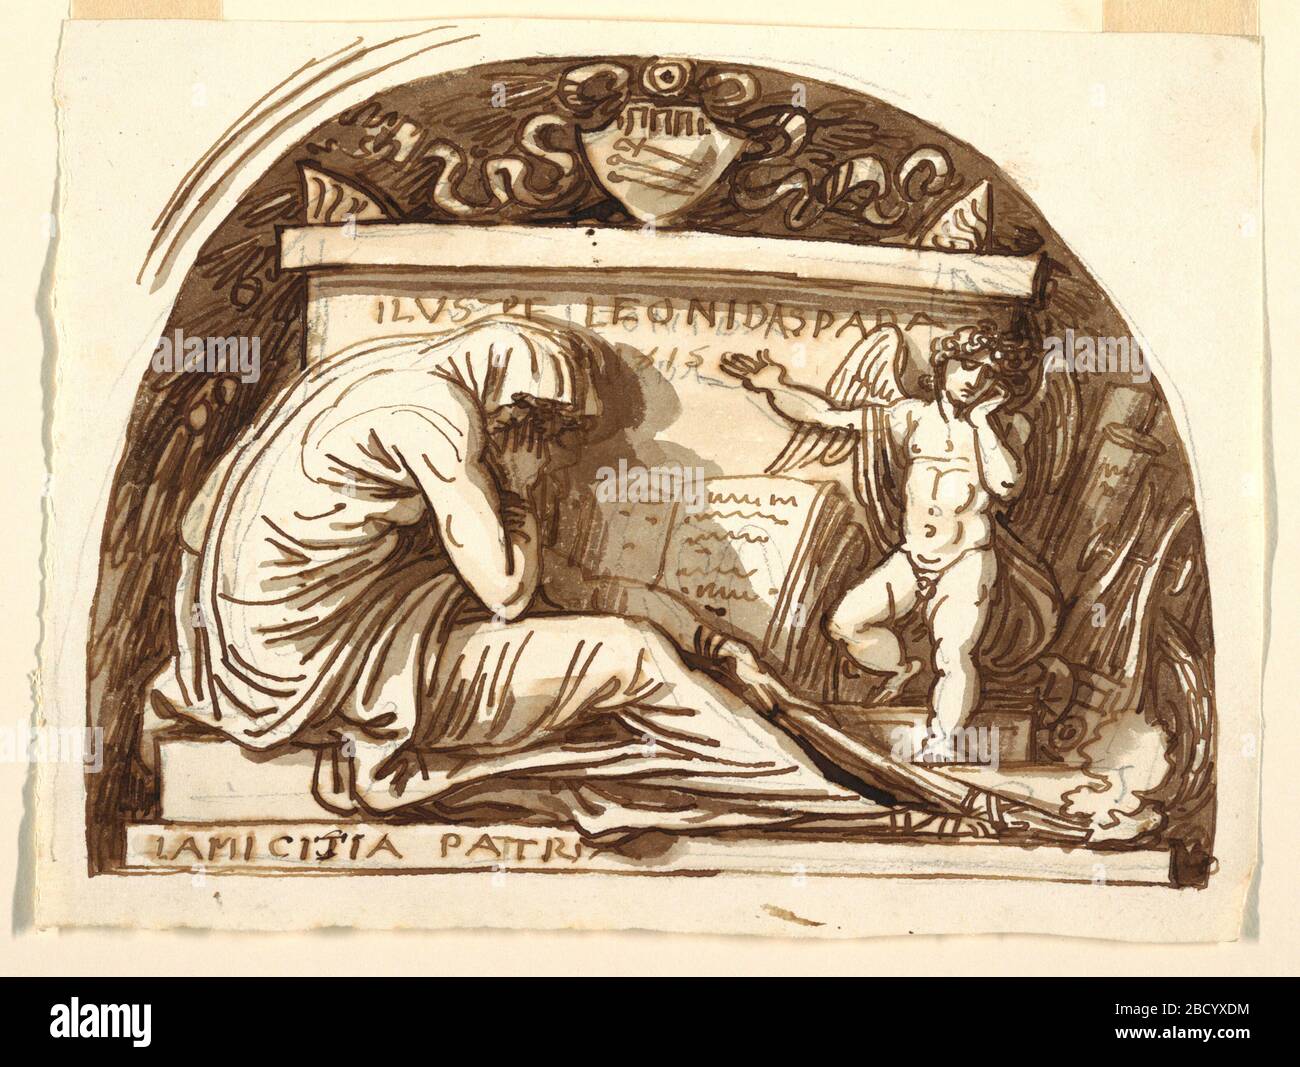 Sepulchral Monument for Leonida Spada. Research in ProgressA sarcophagus topped by a coat-of-arms stands in a lunette-like niche while a sorrowing putto points out the inscription to Leonida Spada. A woman with a torch crouches in the left foreground. Sepulchral Monument for Leonida Spada Stock Photo